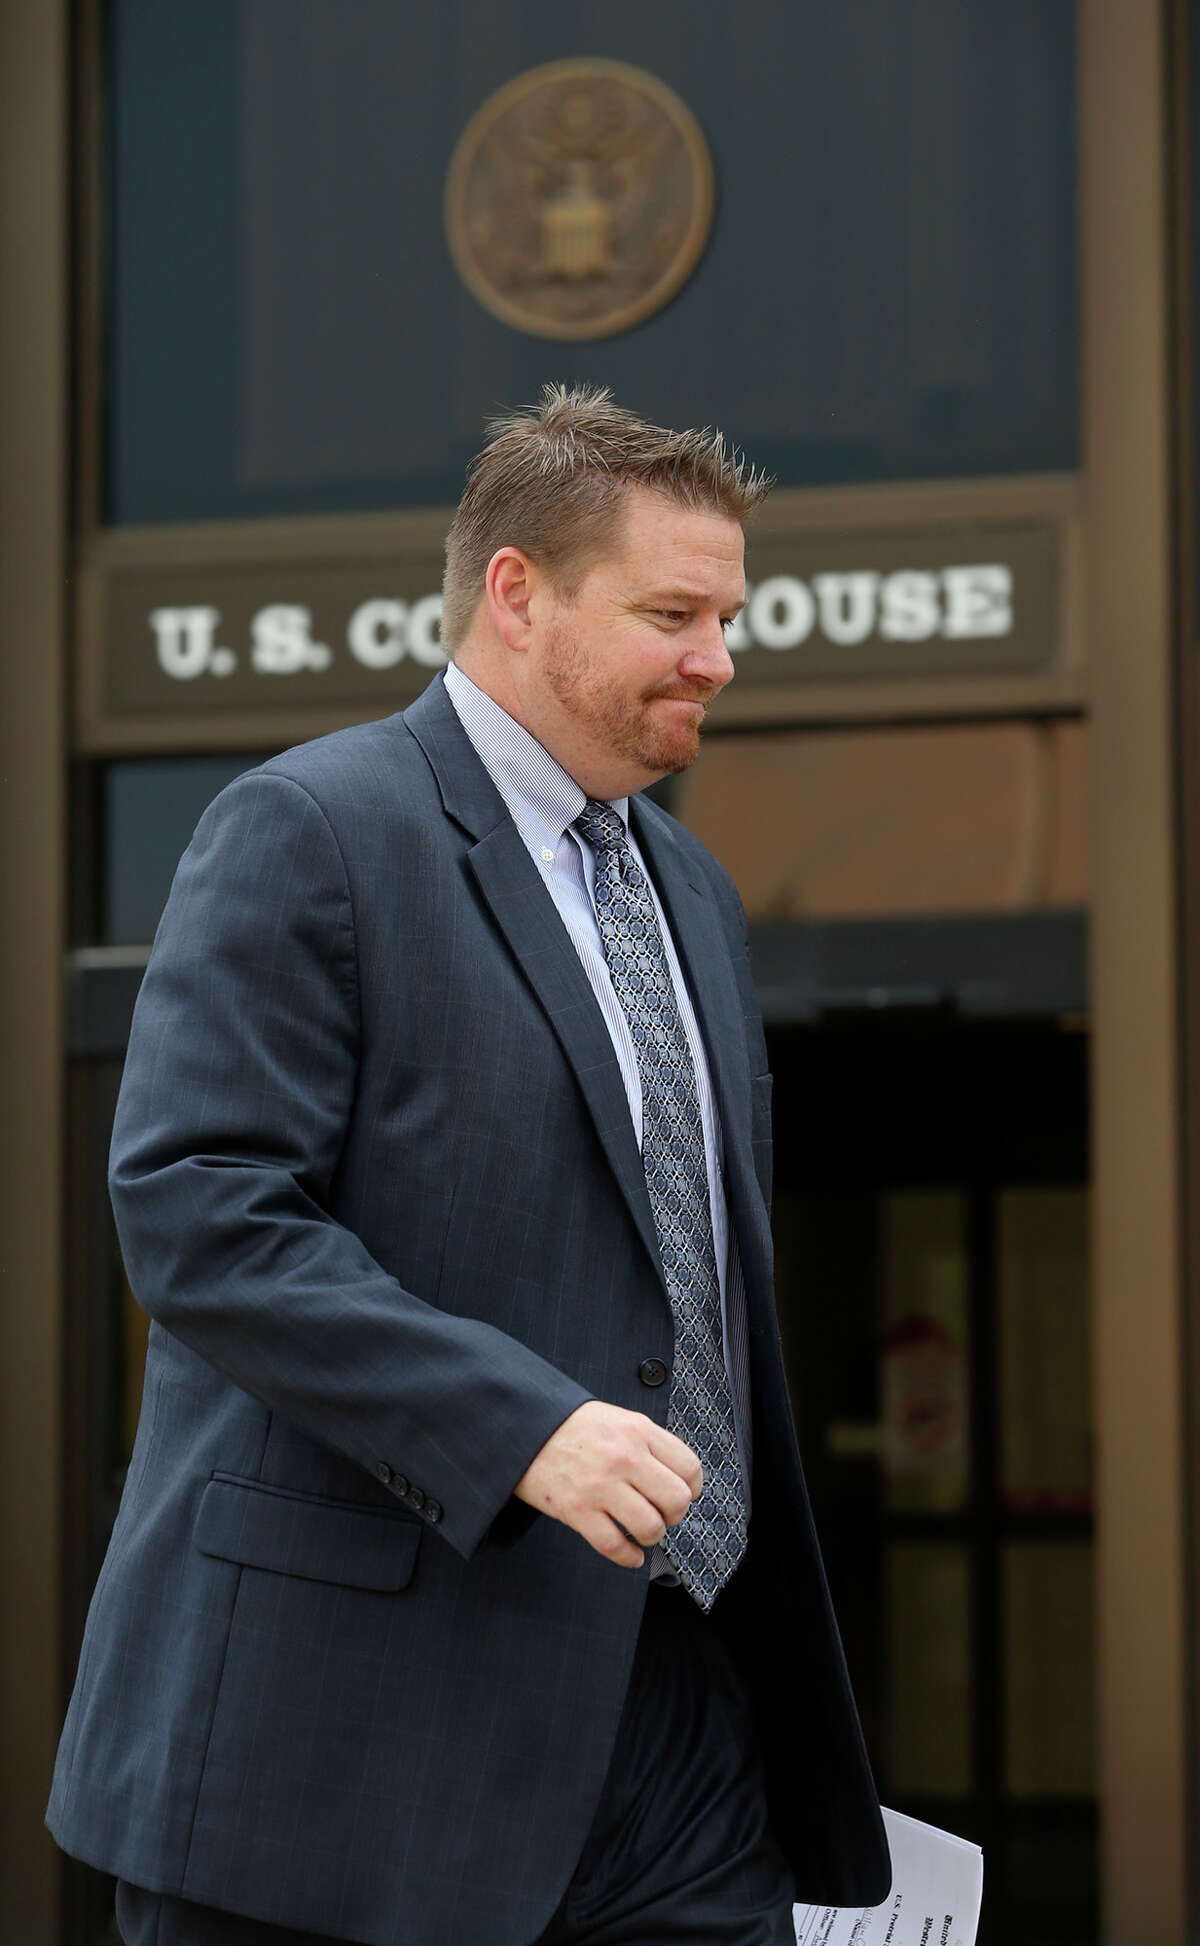 William O. Haff leaves the John Wood Federal Courthouse last March. Haff pleaded guilty to conspiracy to commit fraud charges related to an F.B.I. public corruption investigation that has spread to multiple school districts and the now-defunct Bexar Metropolitan Water District.